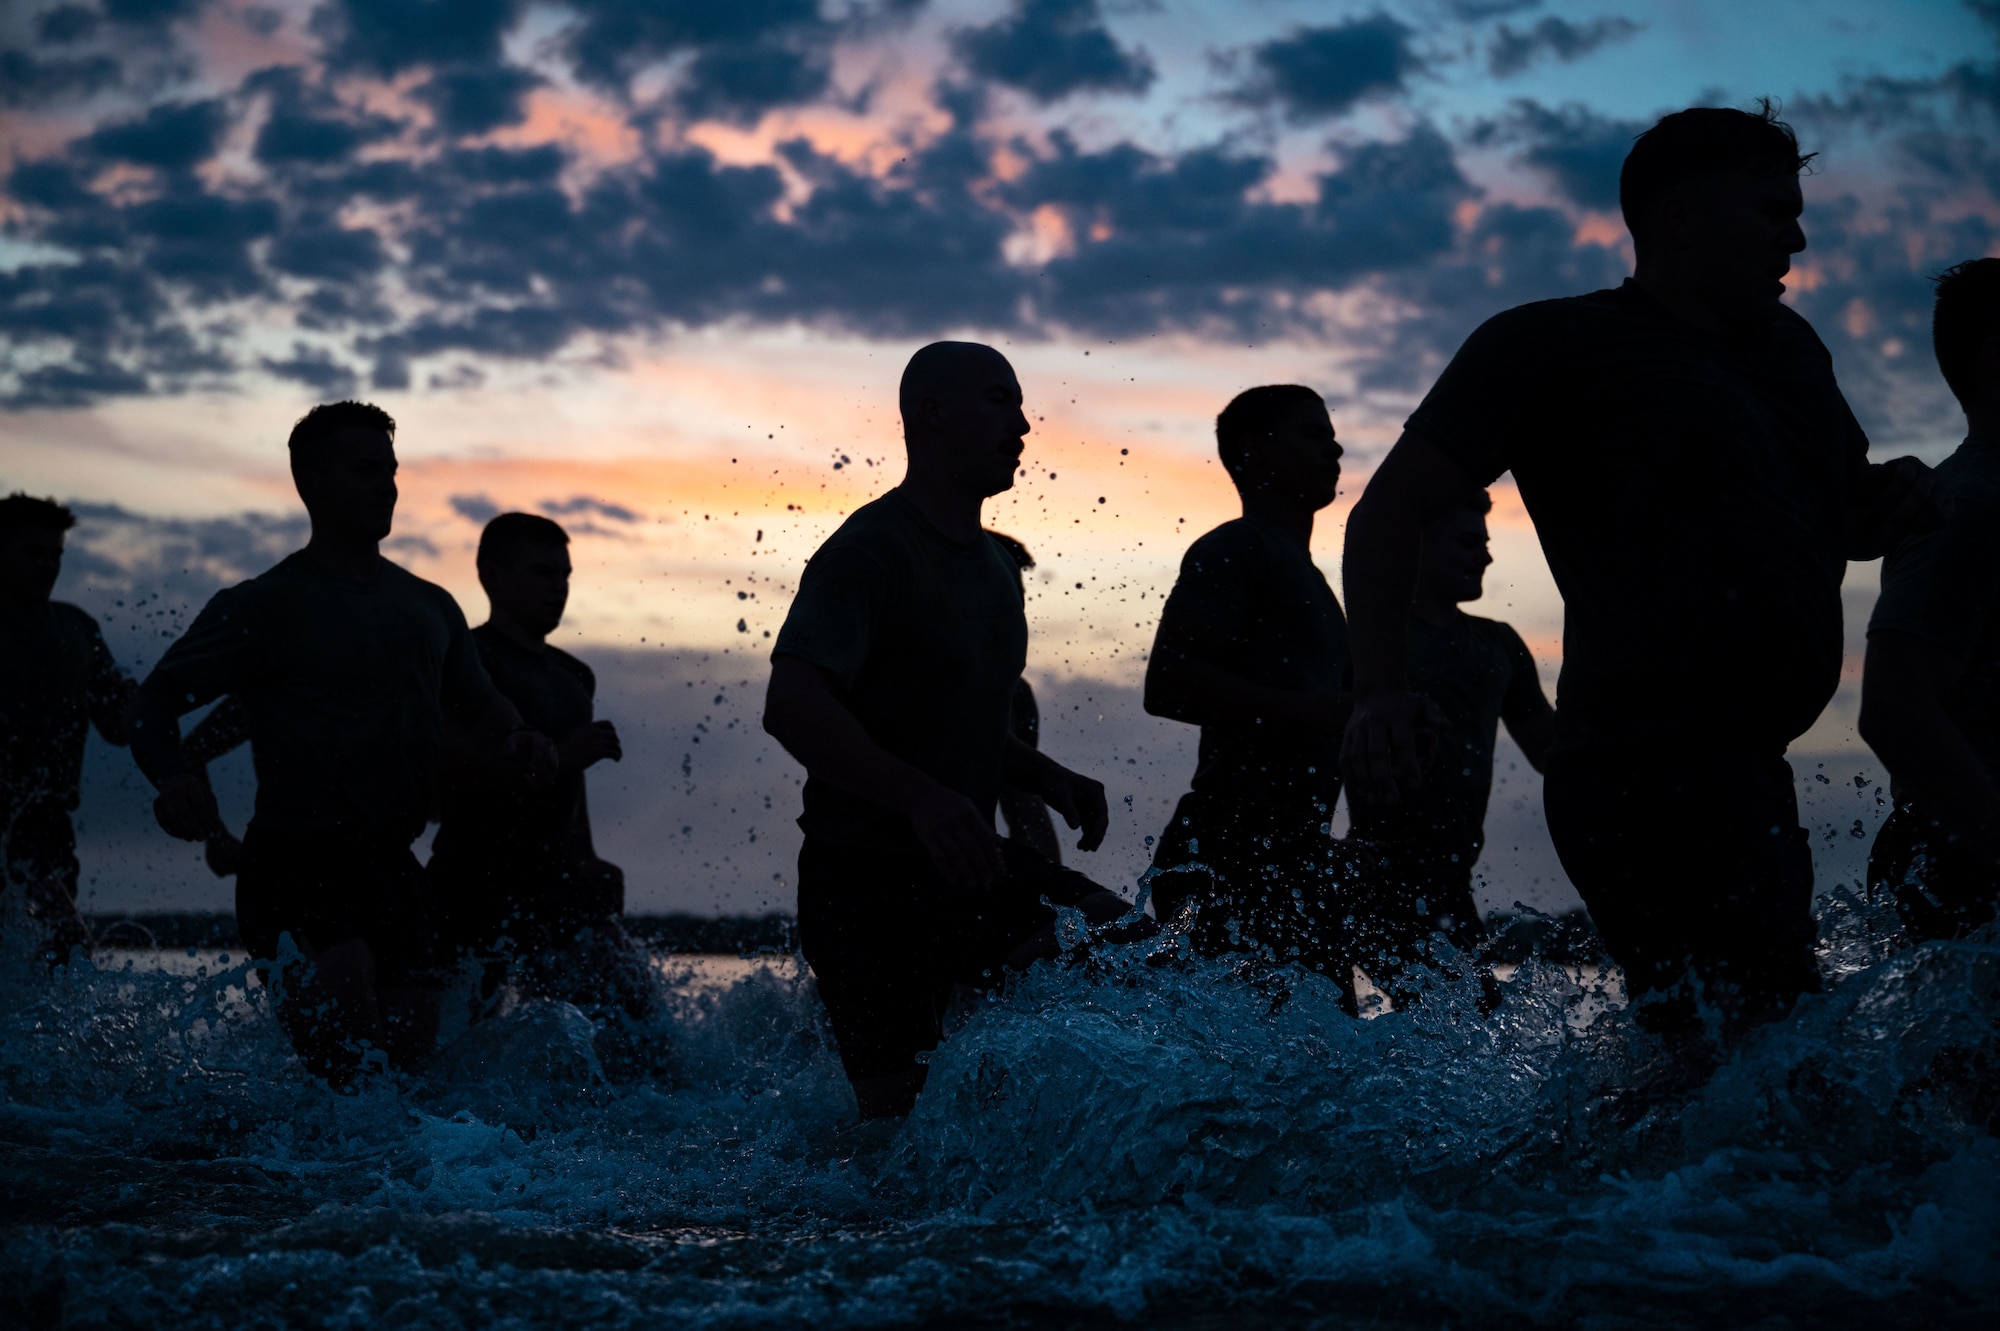 silhouettes run through the shallow ocean, splashing water as the sun rises colorfully behind them